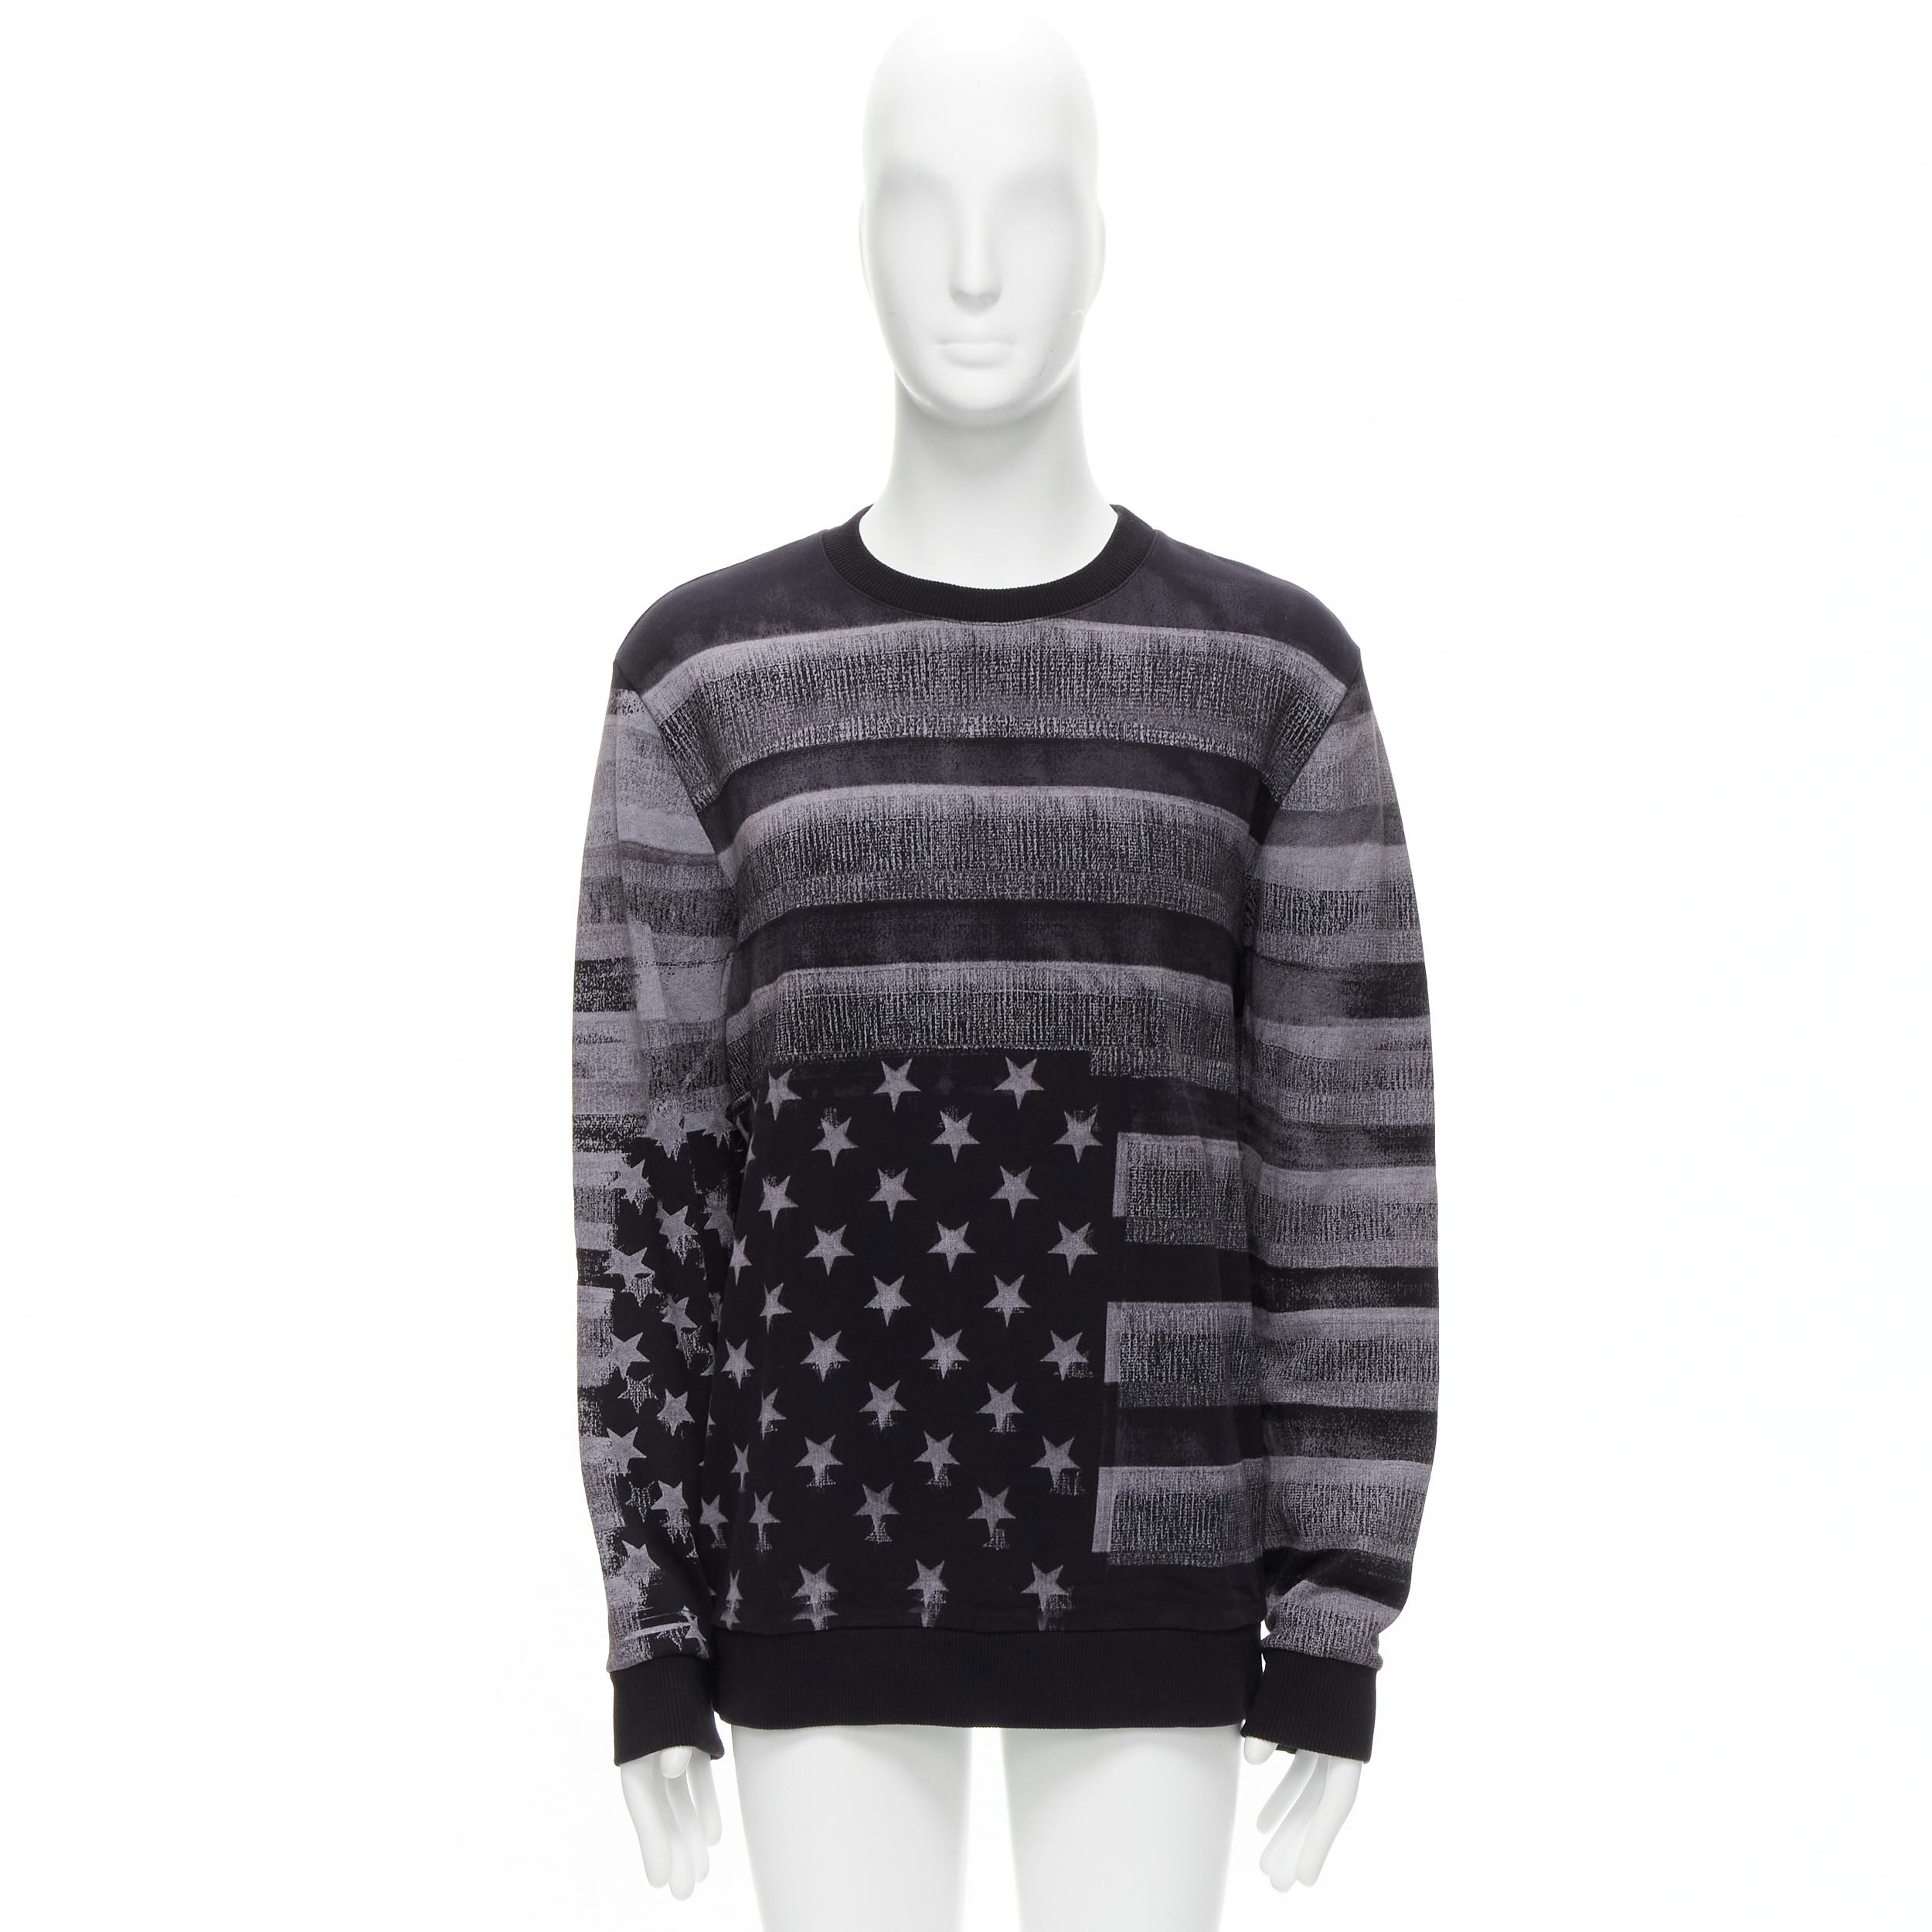 GIVENCHY Riccardo Tisci grey Americana flag distressed cotton crew sweater M For Sale 5